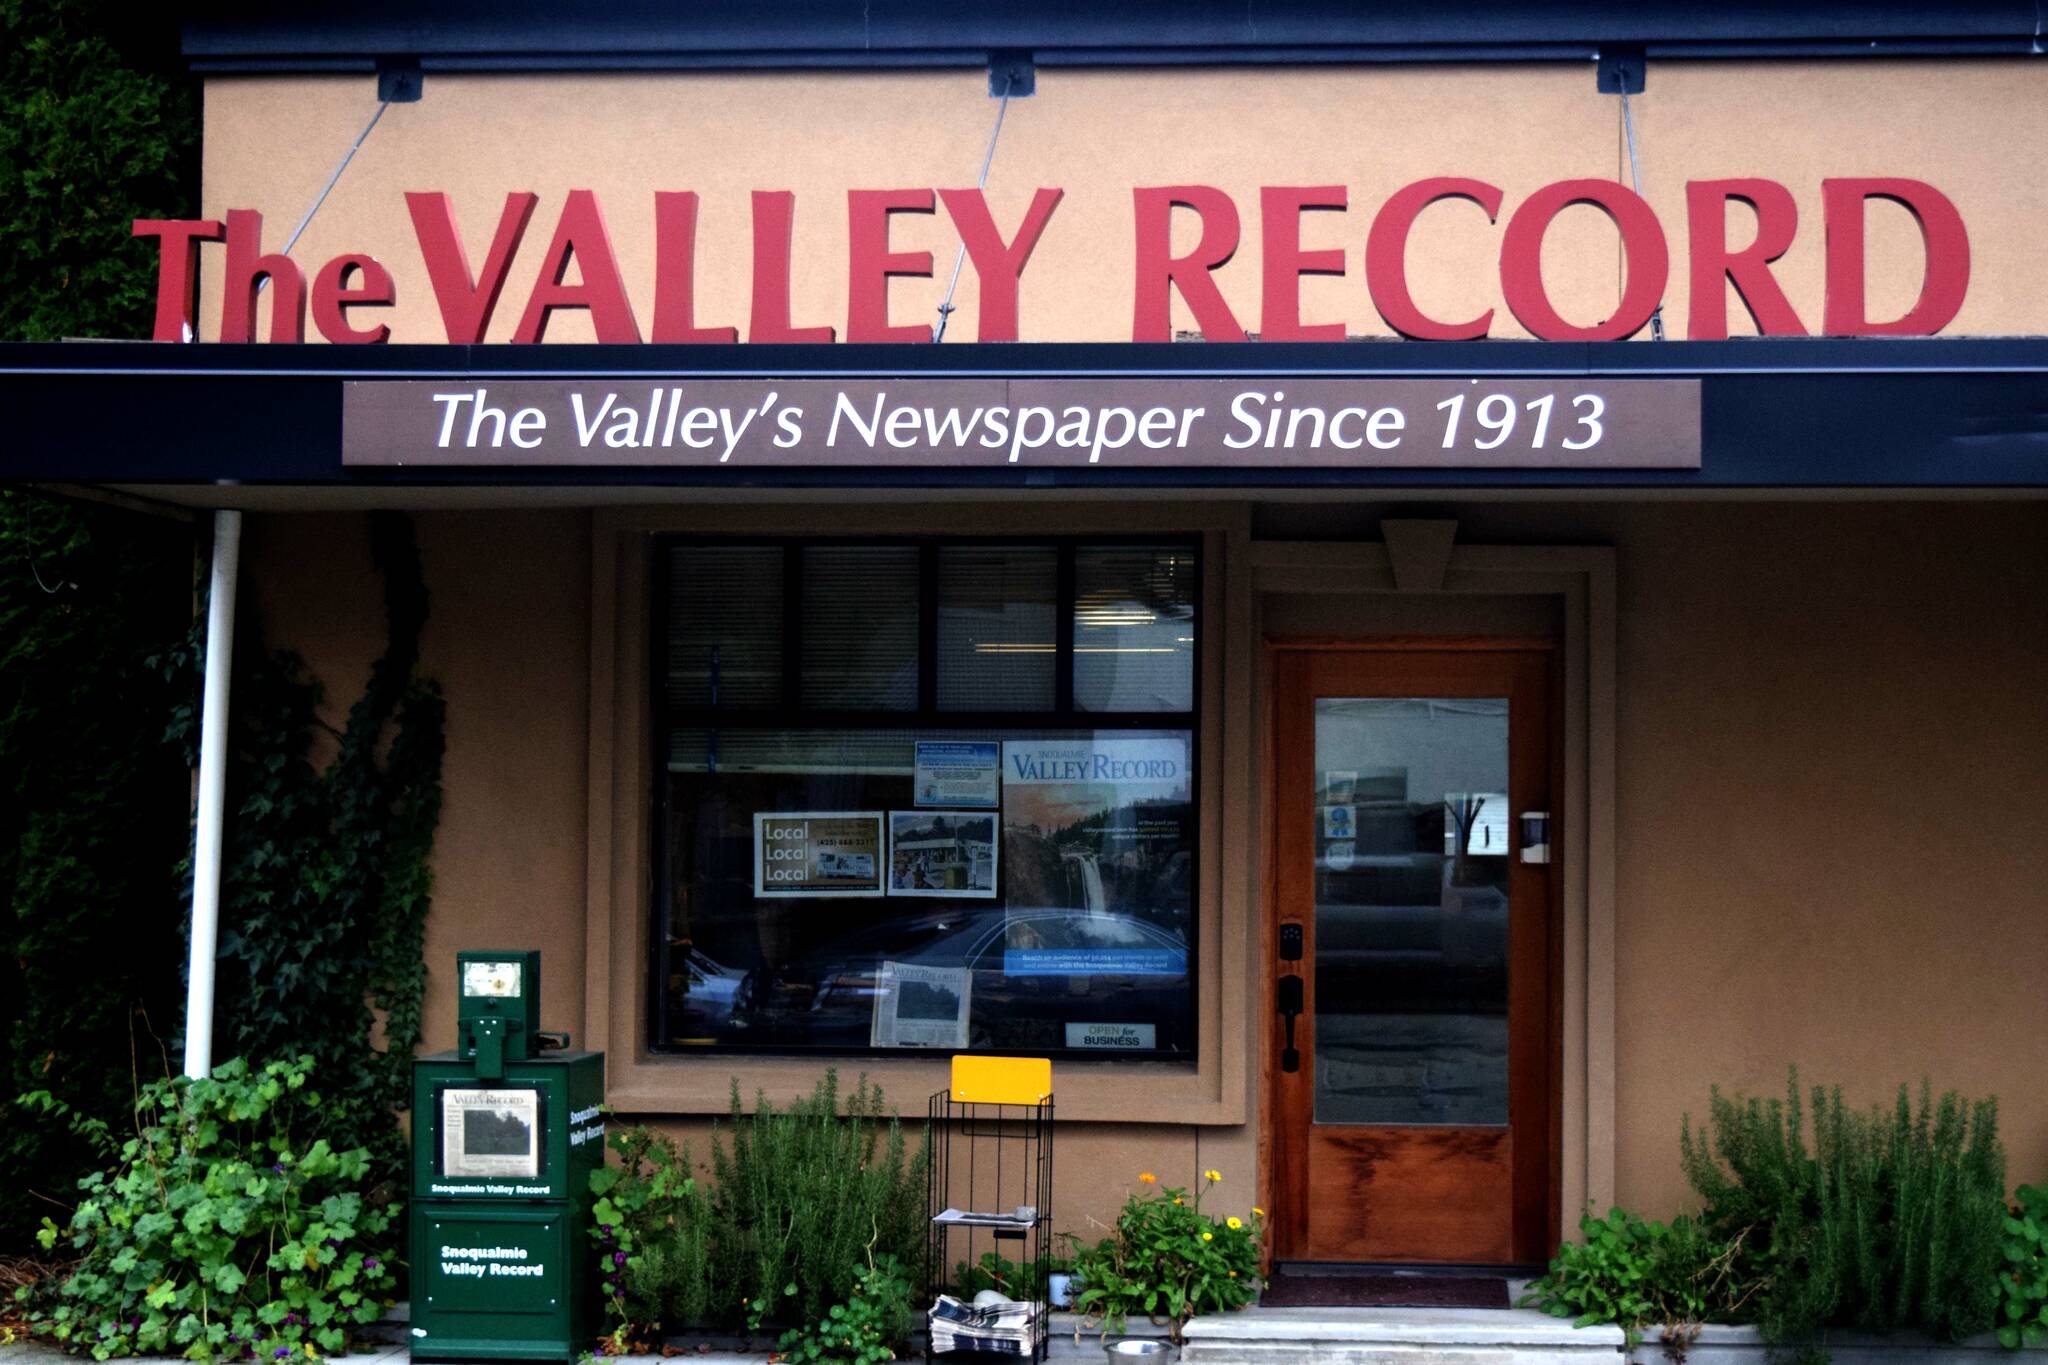 The Snoqualmie Valley Record's downtown Snoqualmie office.